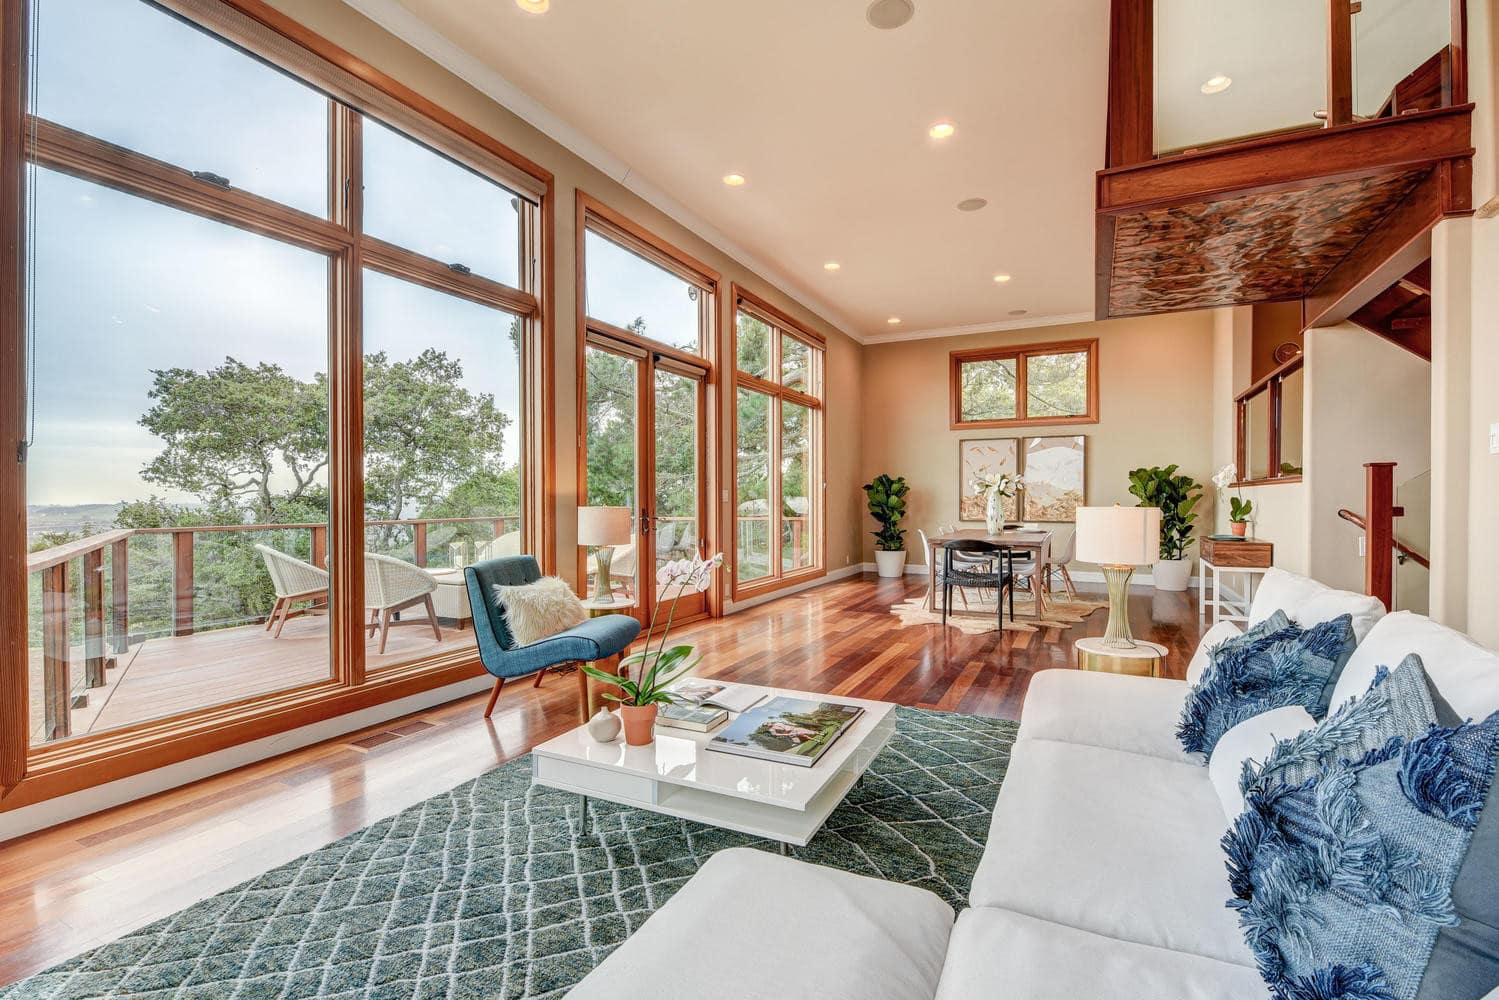 This luxurious 4-bedroom home in Napa features stellar views and a prime location